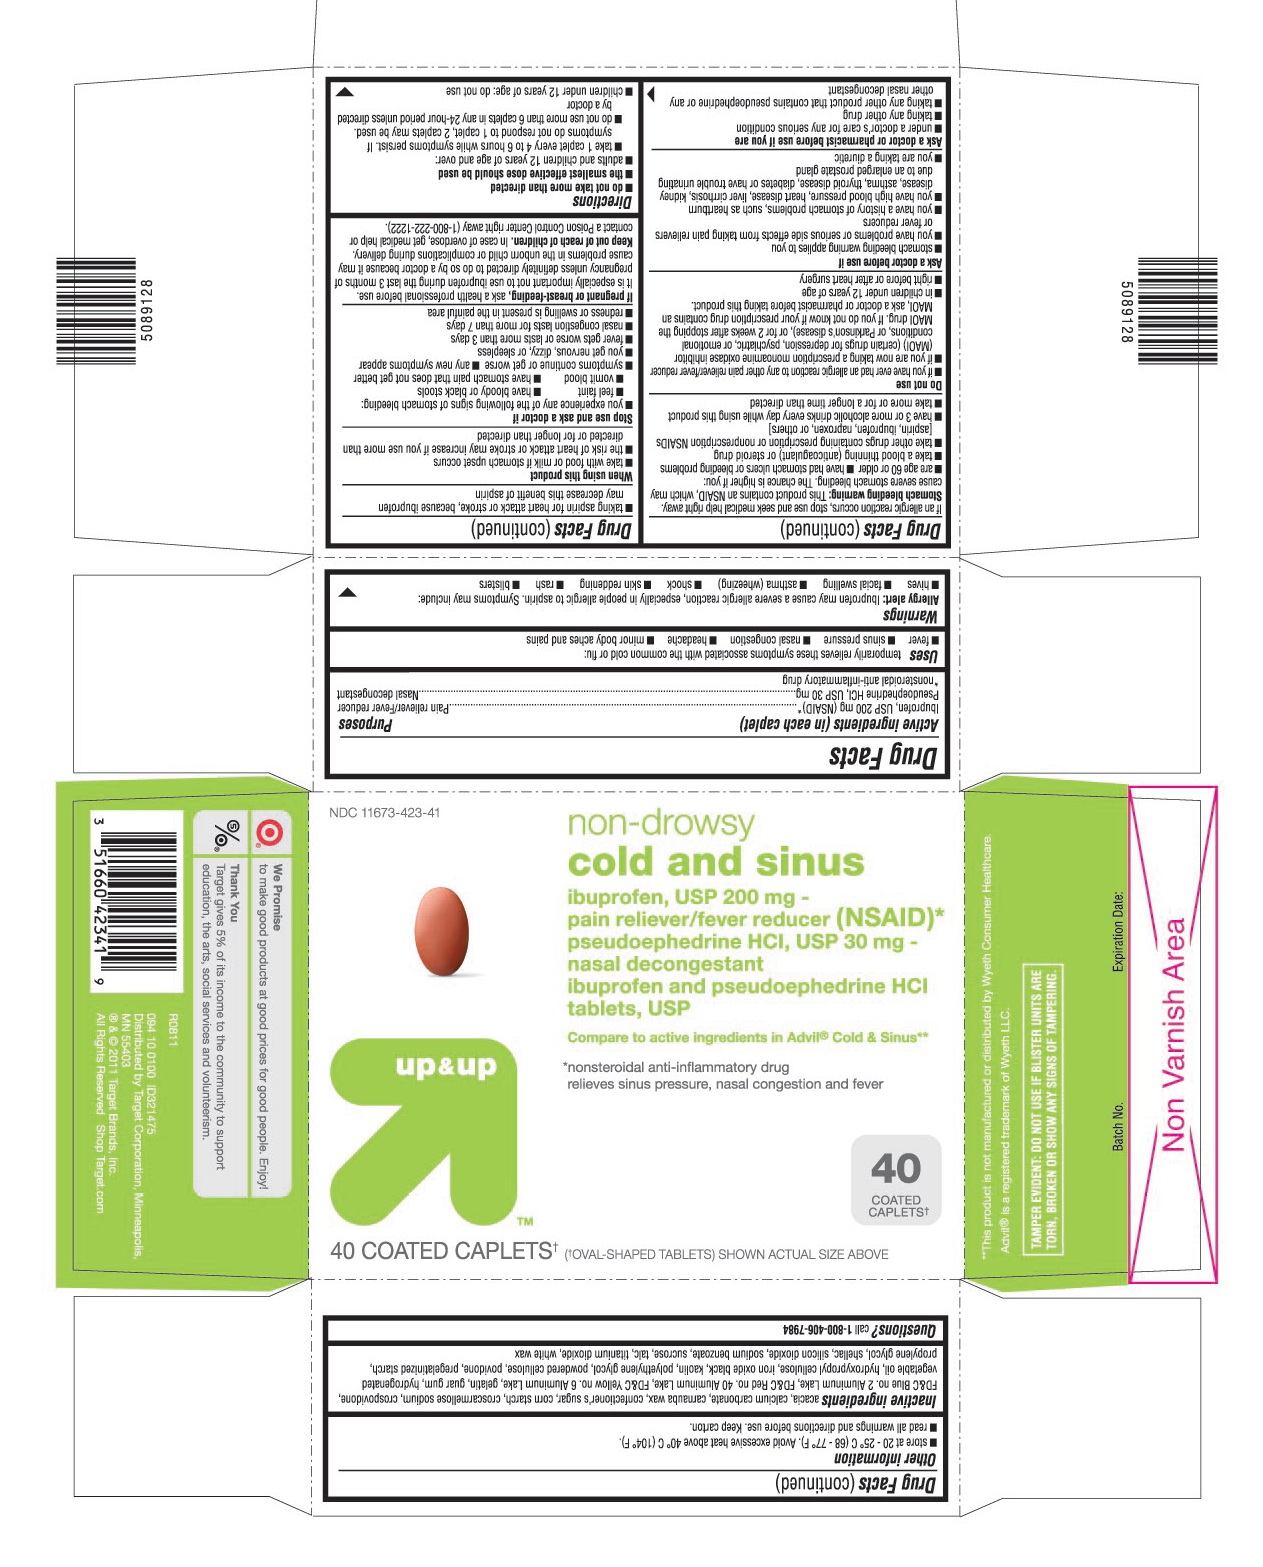 This is the 40 count blister carton label for Target Ibuprofen and Pseudoephedrine HCl tablets, USP.